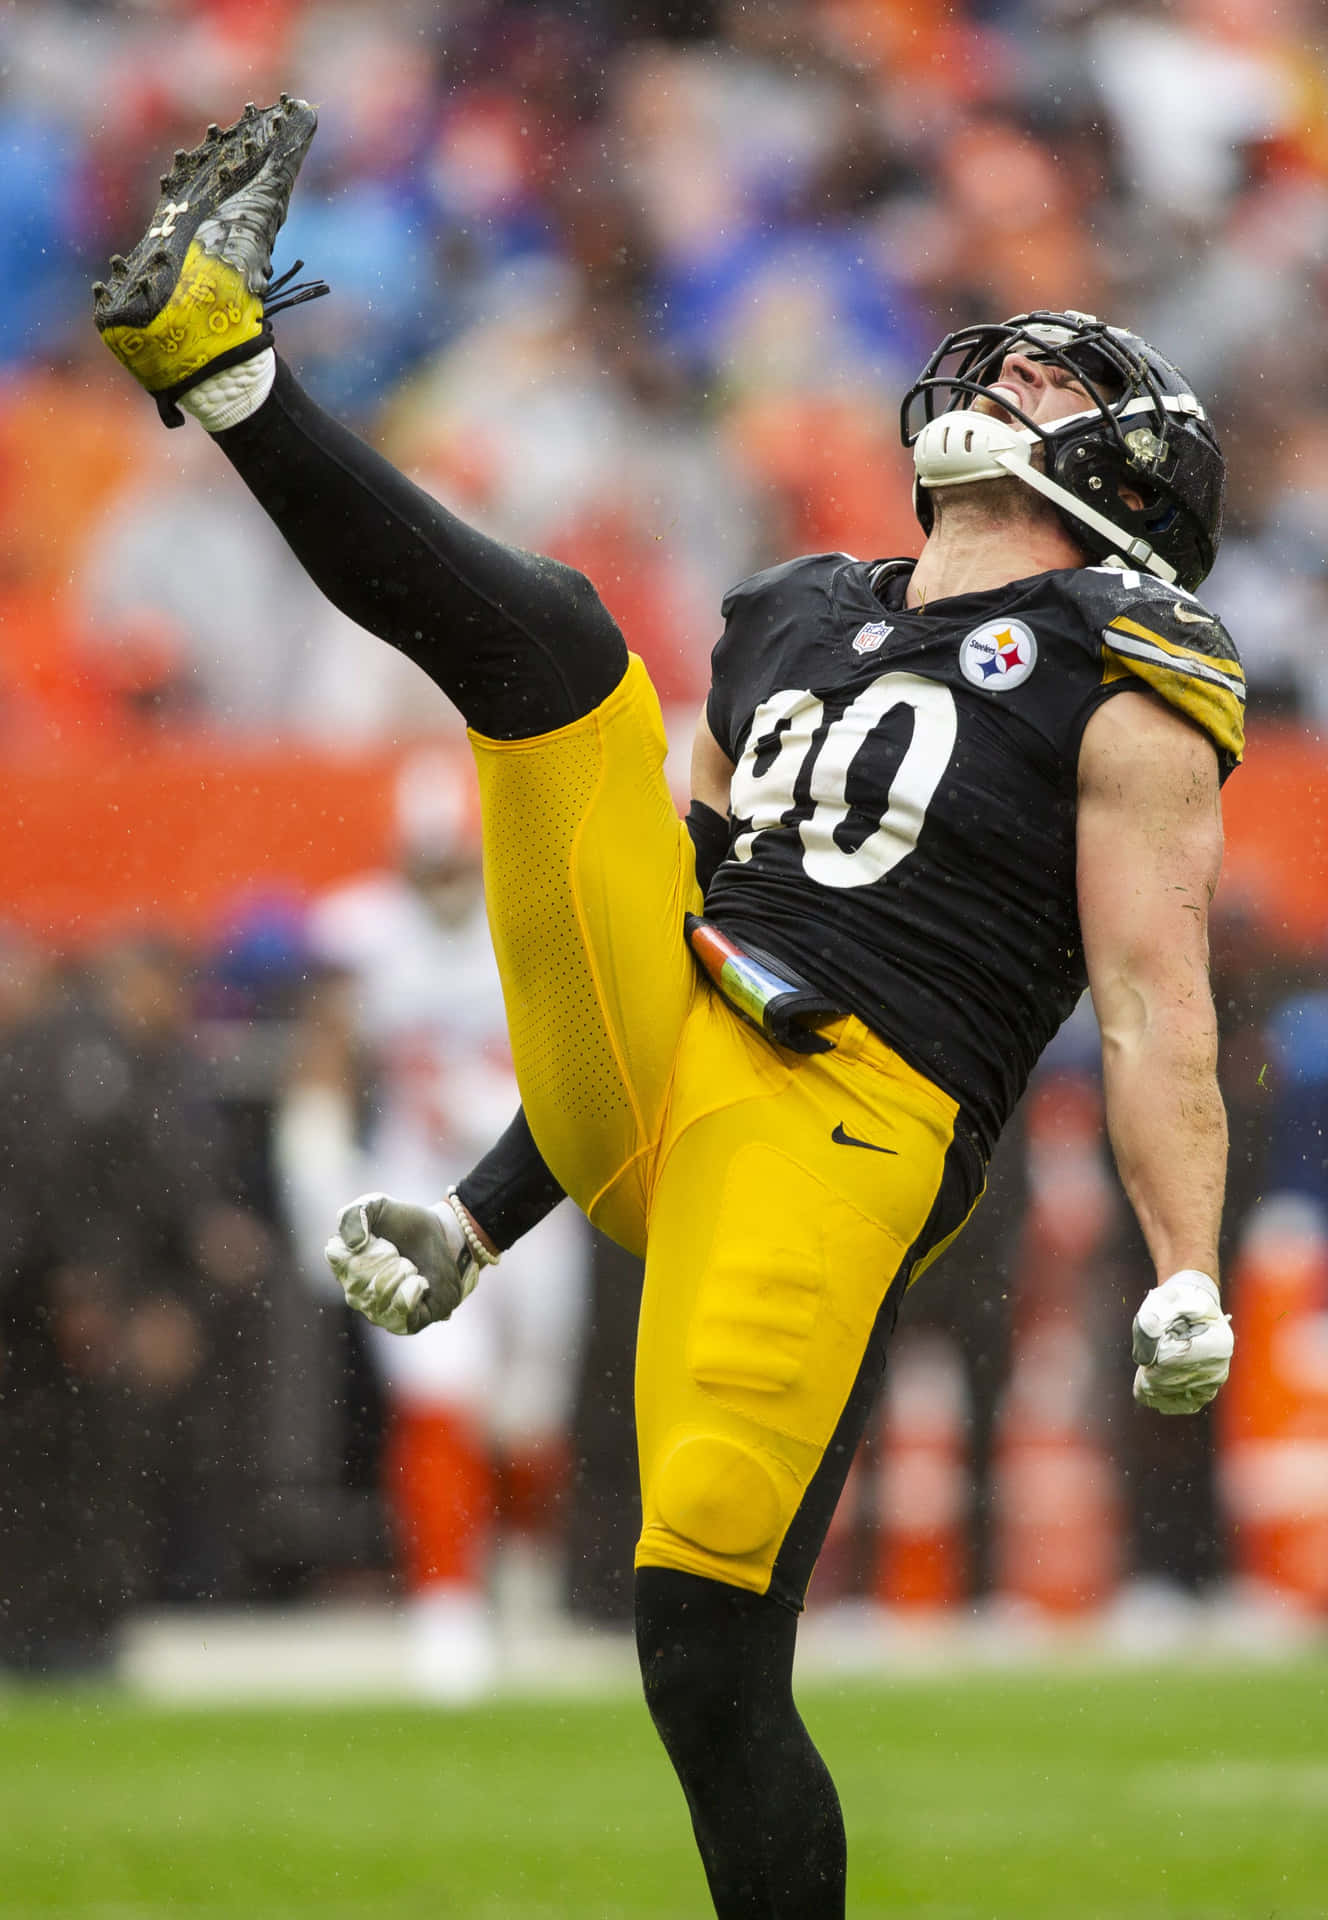 Download wallpapers tj watt pittsburgh steelers for desktop free High  Quality HD pictures wallpapers  Page 1